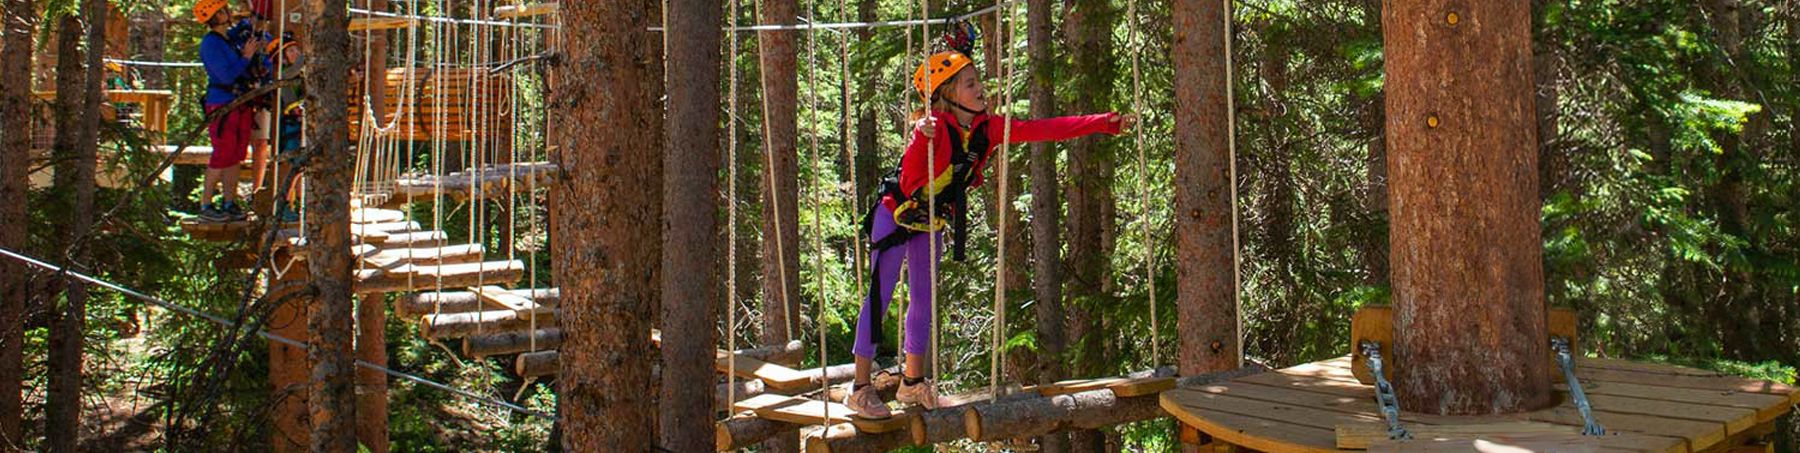 The whole family can have fun at the Lost Forest in Snowmass